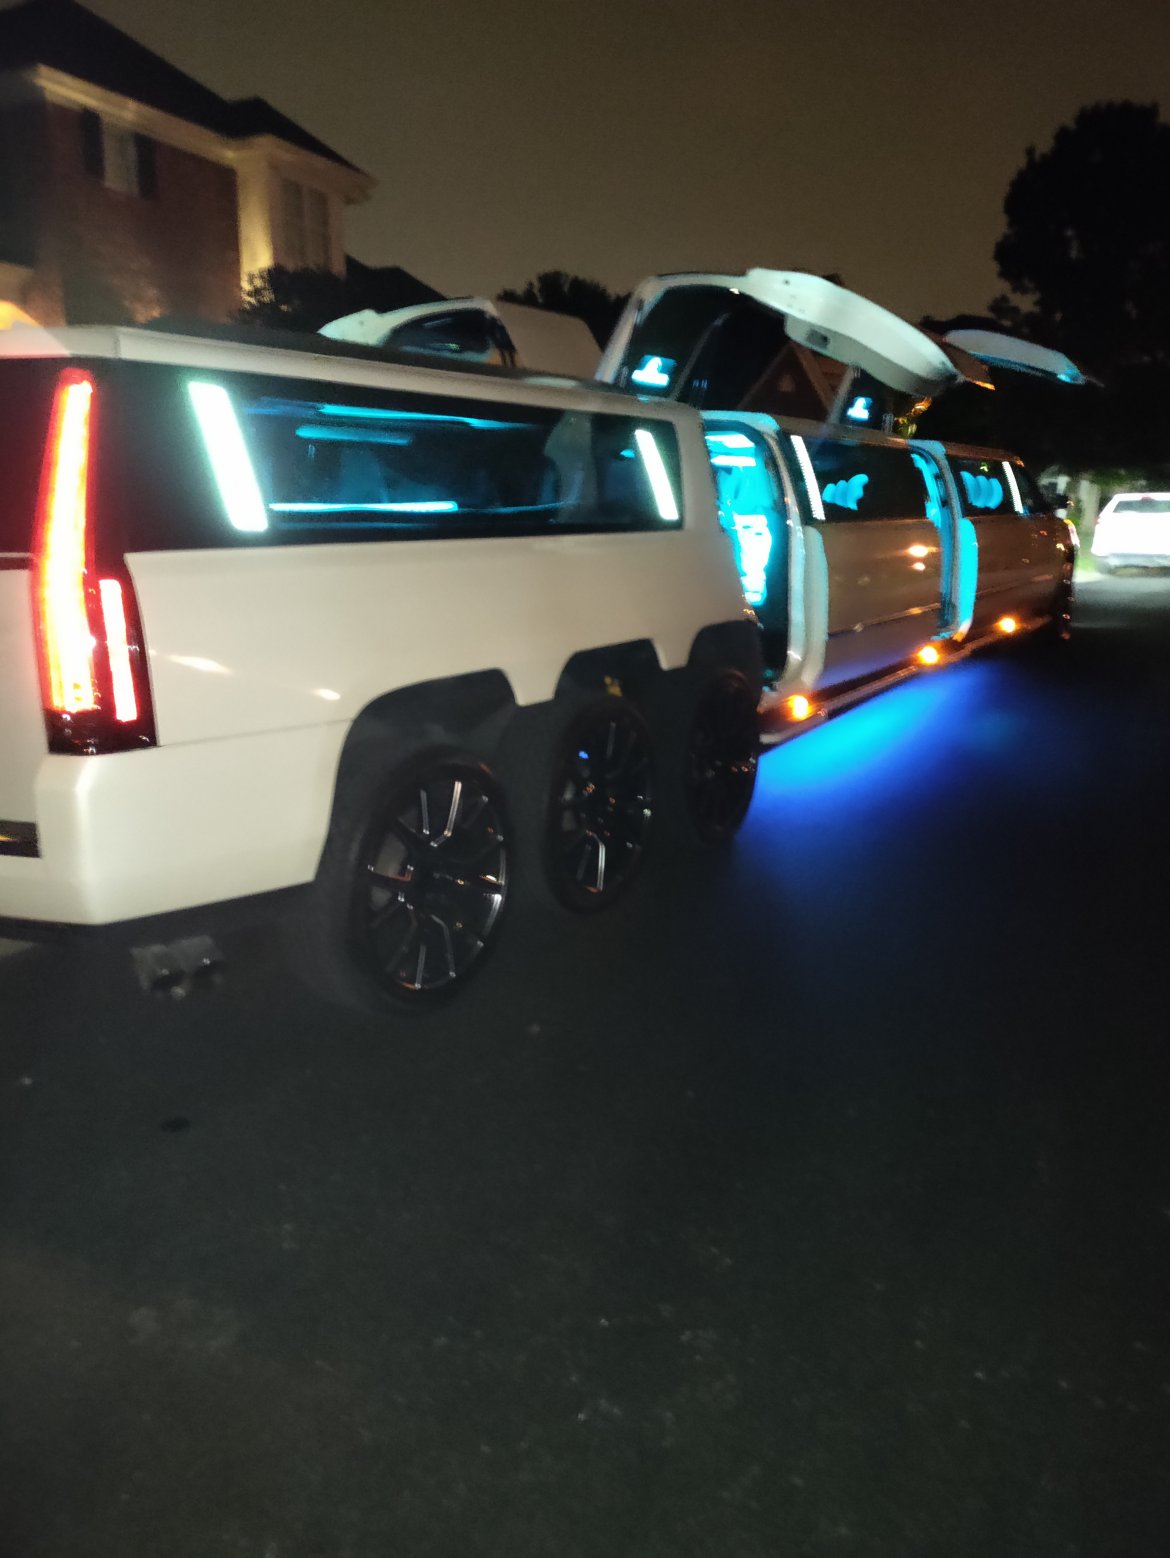 Limousine for sale: 2015 Cadillac escalade 40&quot; by limos by moonlight